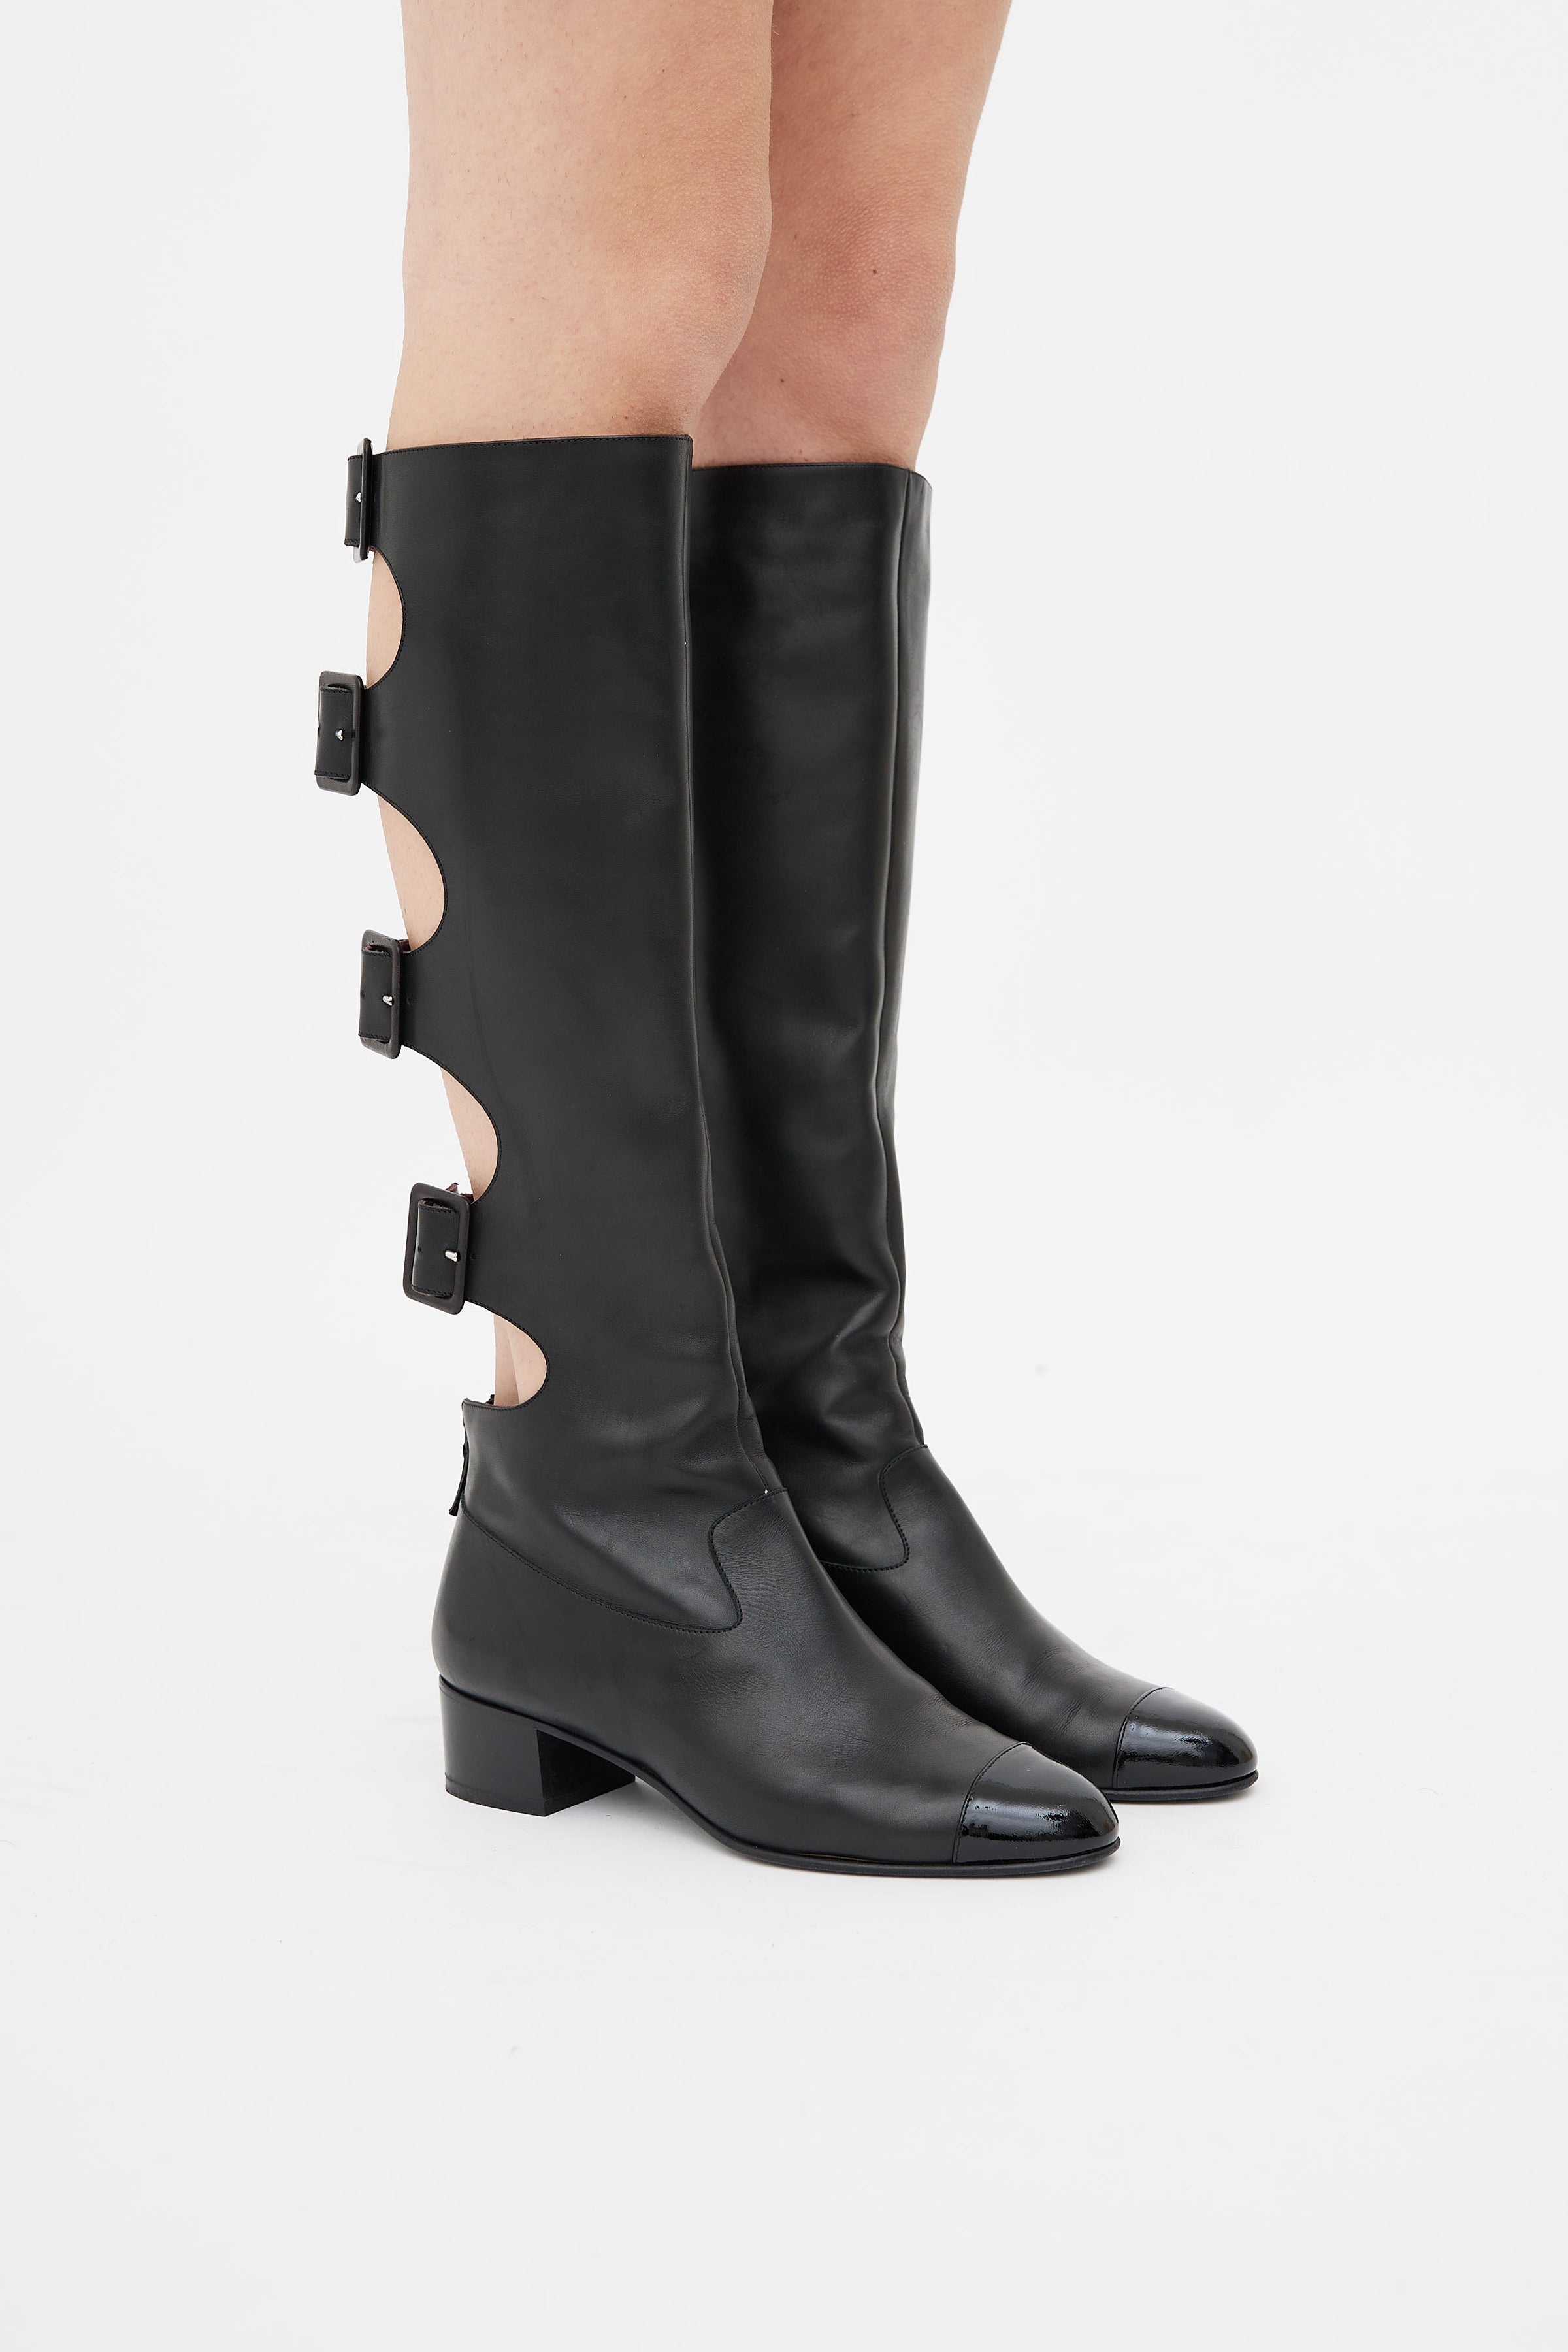 Chanel // Black Leather Gladiator Buckle Knee High Boot – VSP Consignment